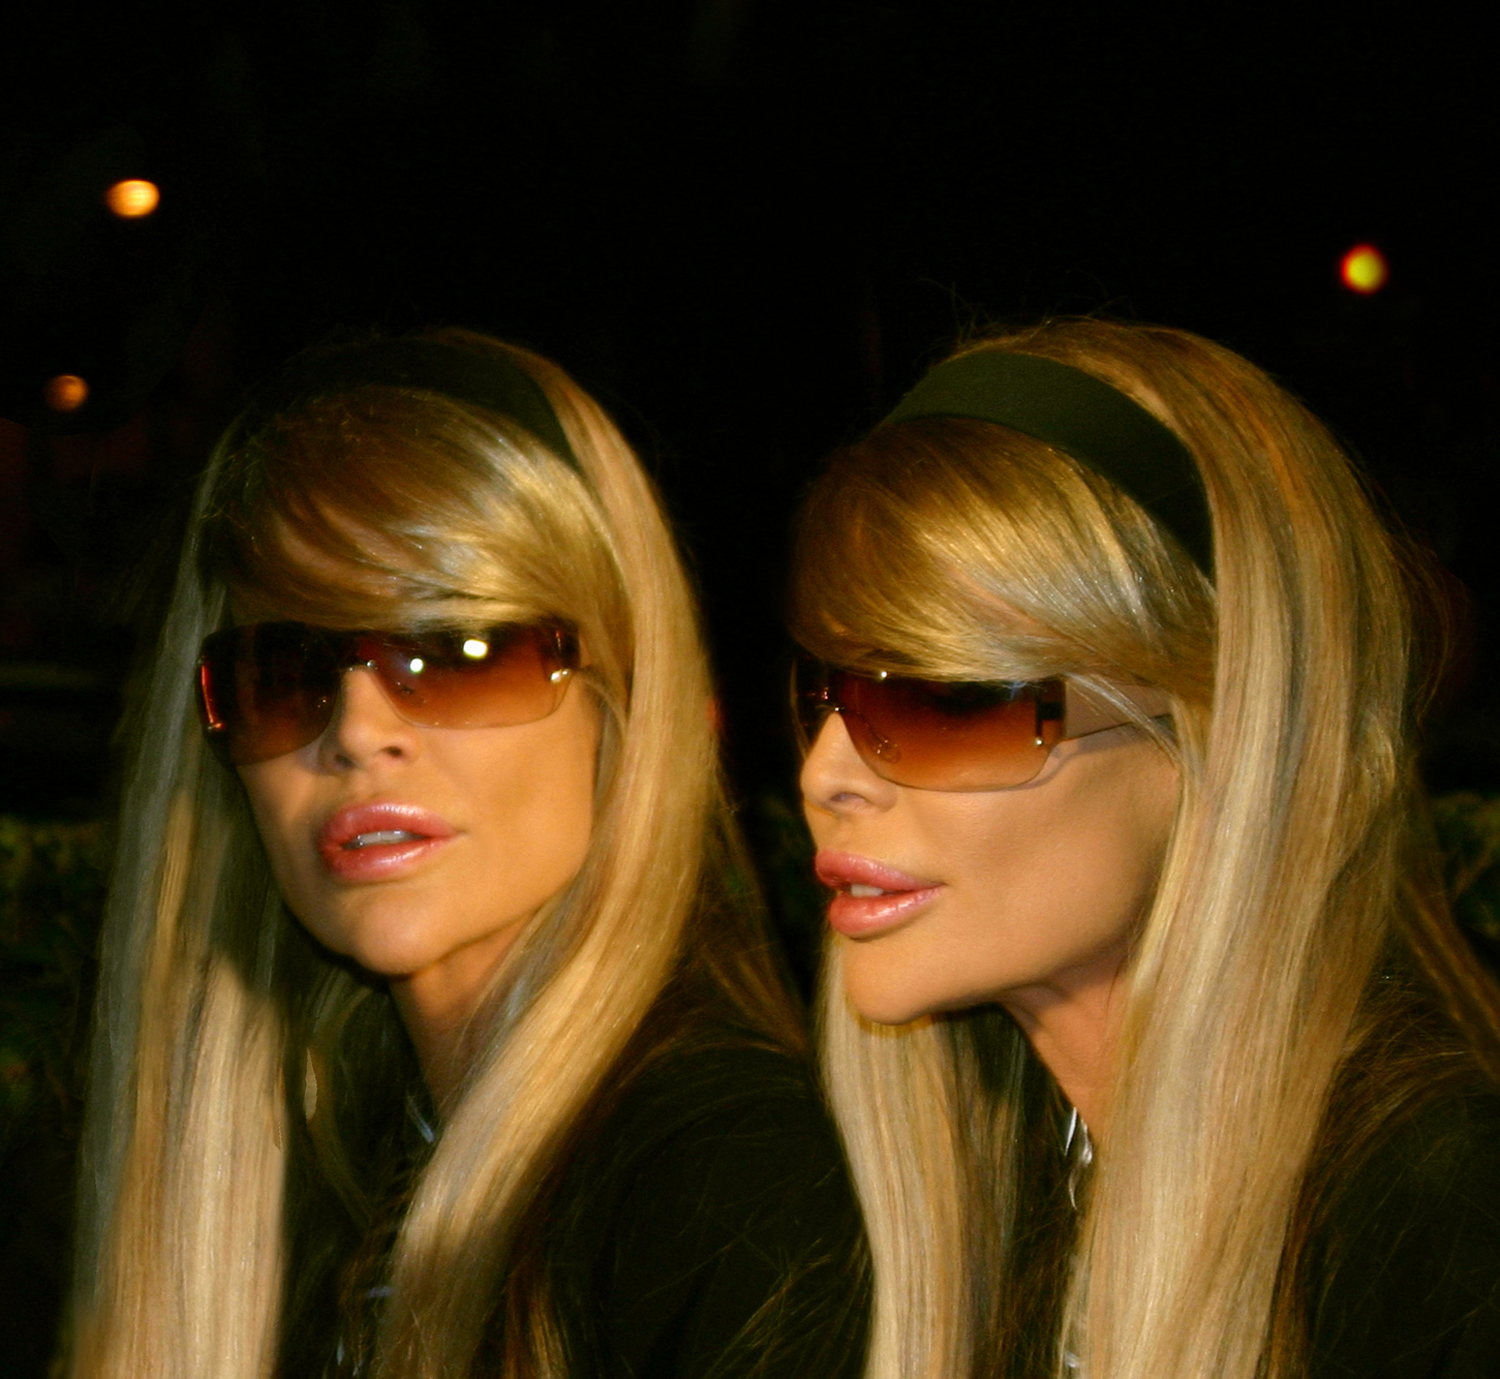 Official Website of the Barbi twins